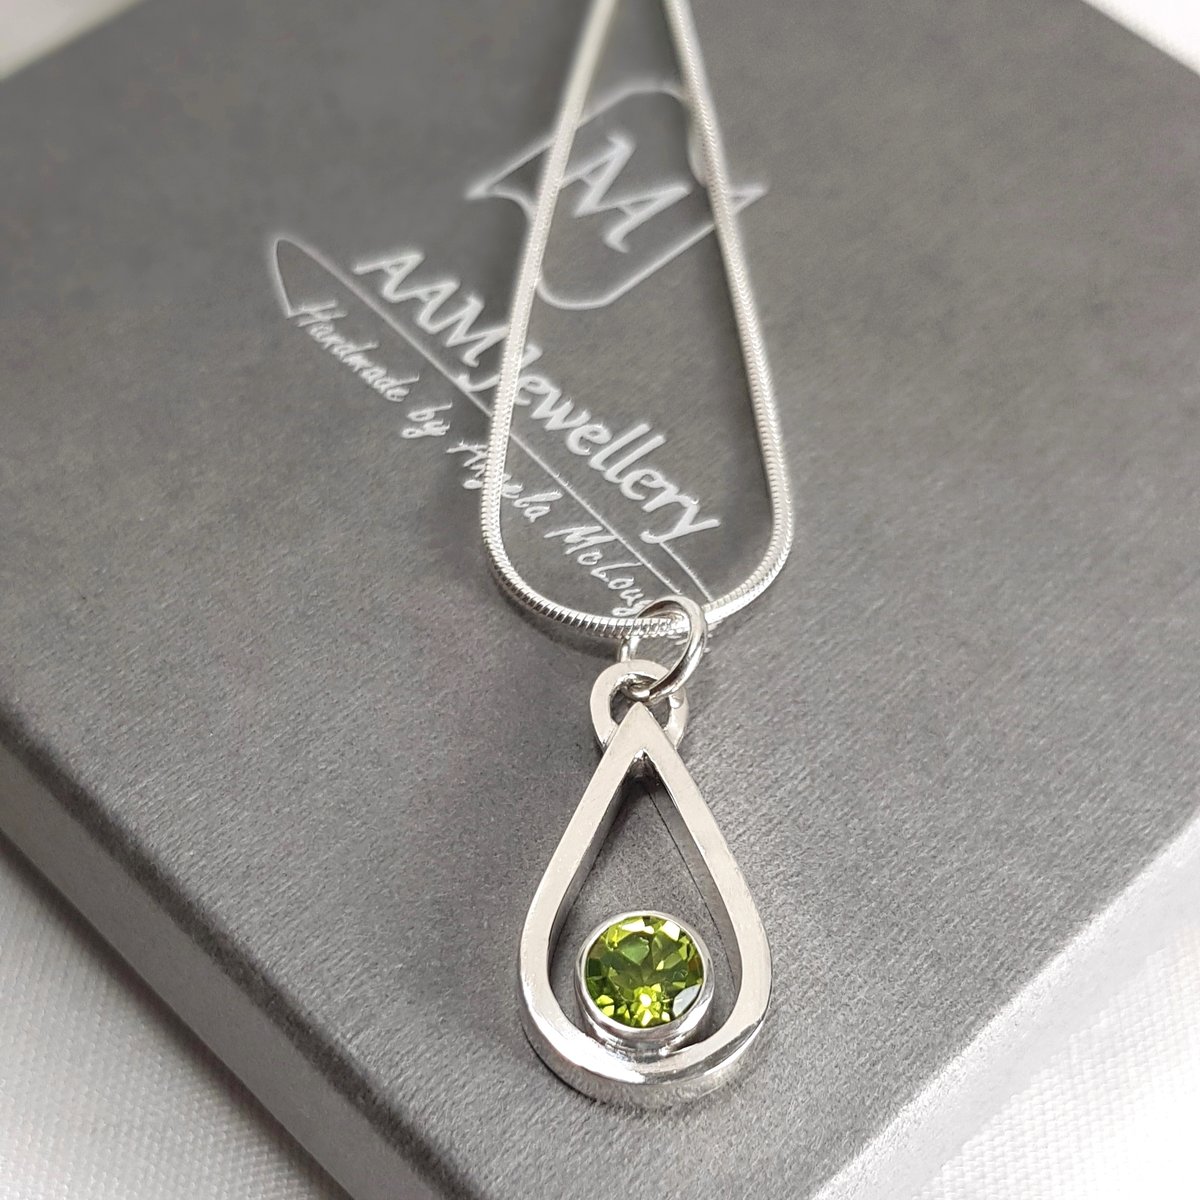 Image of Sterling Silver Peridot Pendant Necklace, Solid Silver Teardrop Necklace, August Birthstone